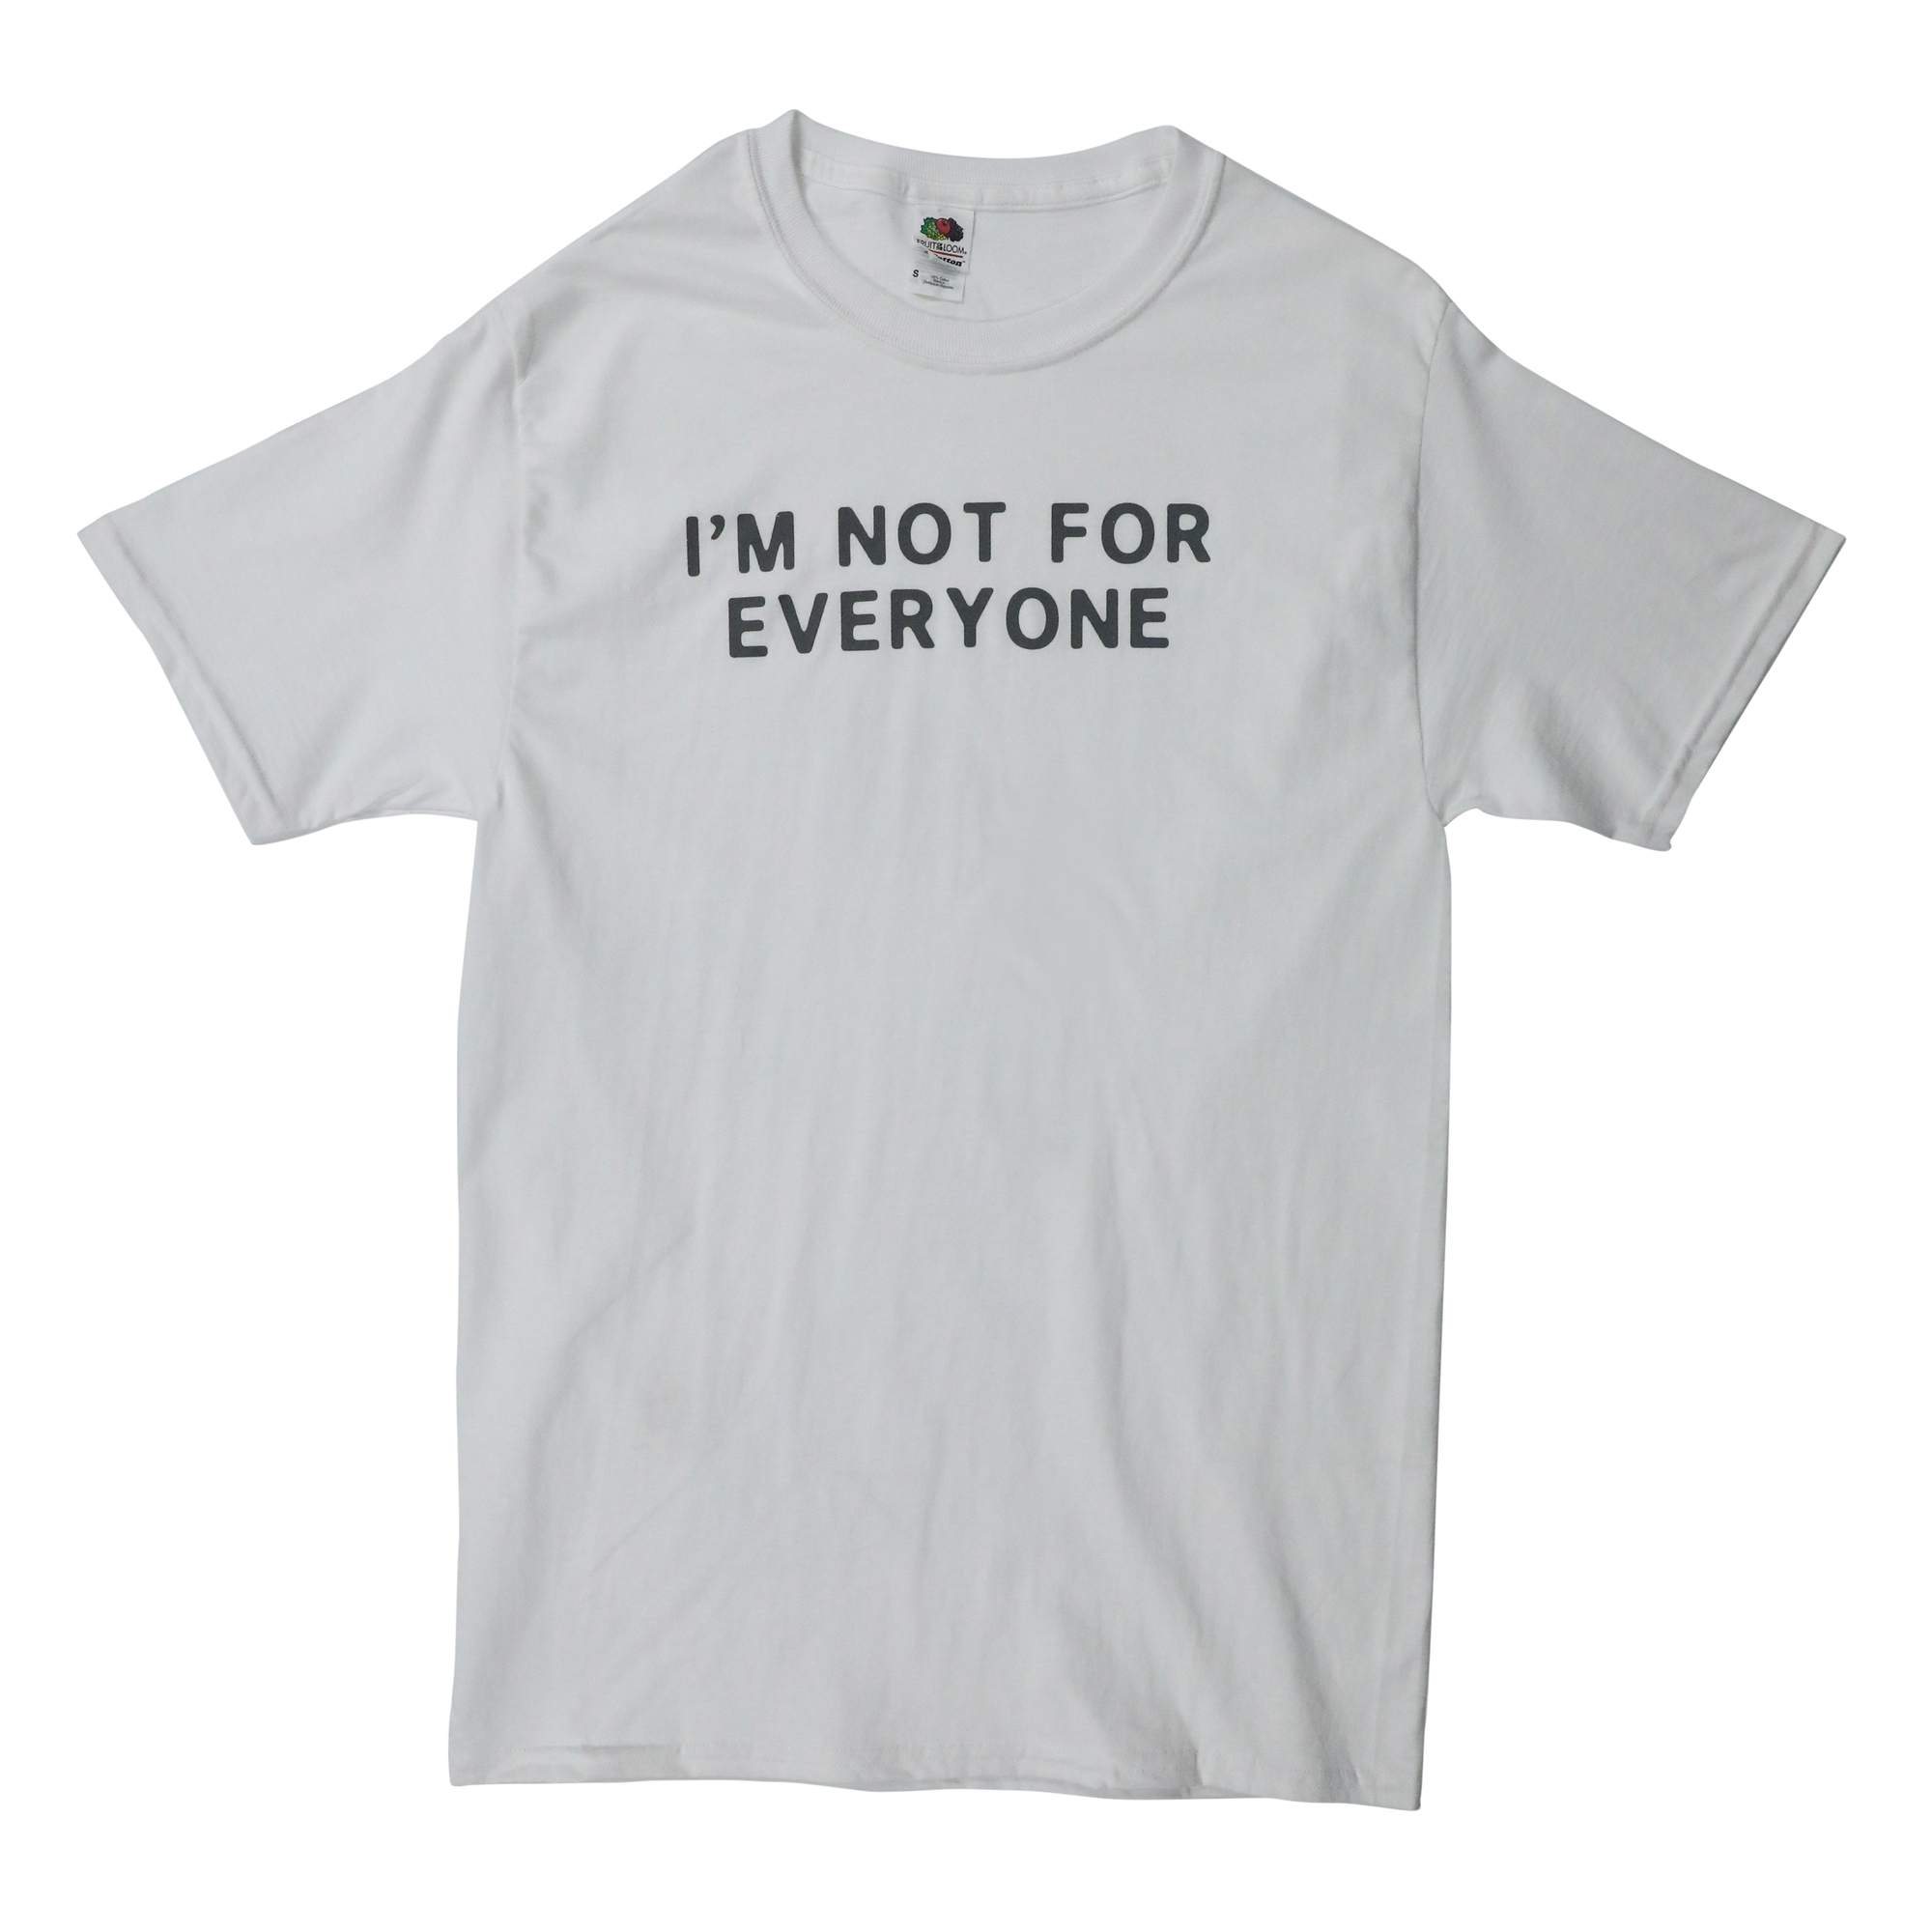 'I'm not for everyone' graphic tee